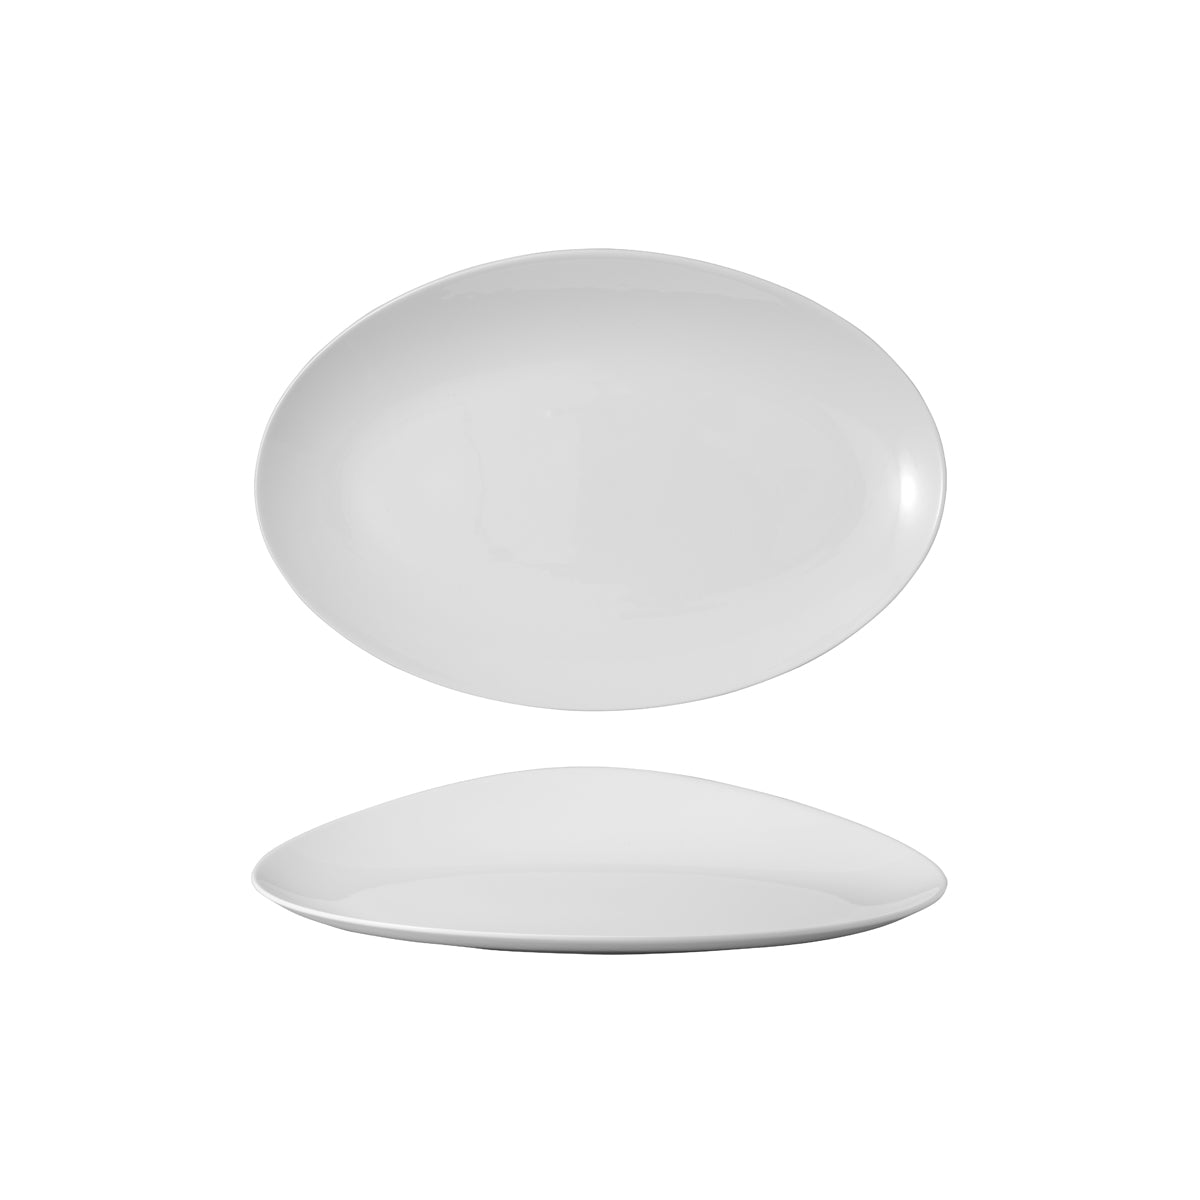 VB16-4090-2692 Villeroy And Boch Villeroy And Boch Stella Cosmo White Oval Coupe Plate 340x225x55mm Tomkin Australia Hospitality Supplies